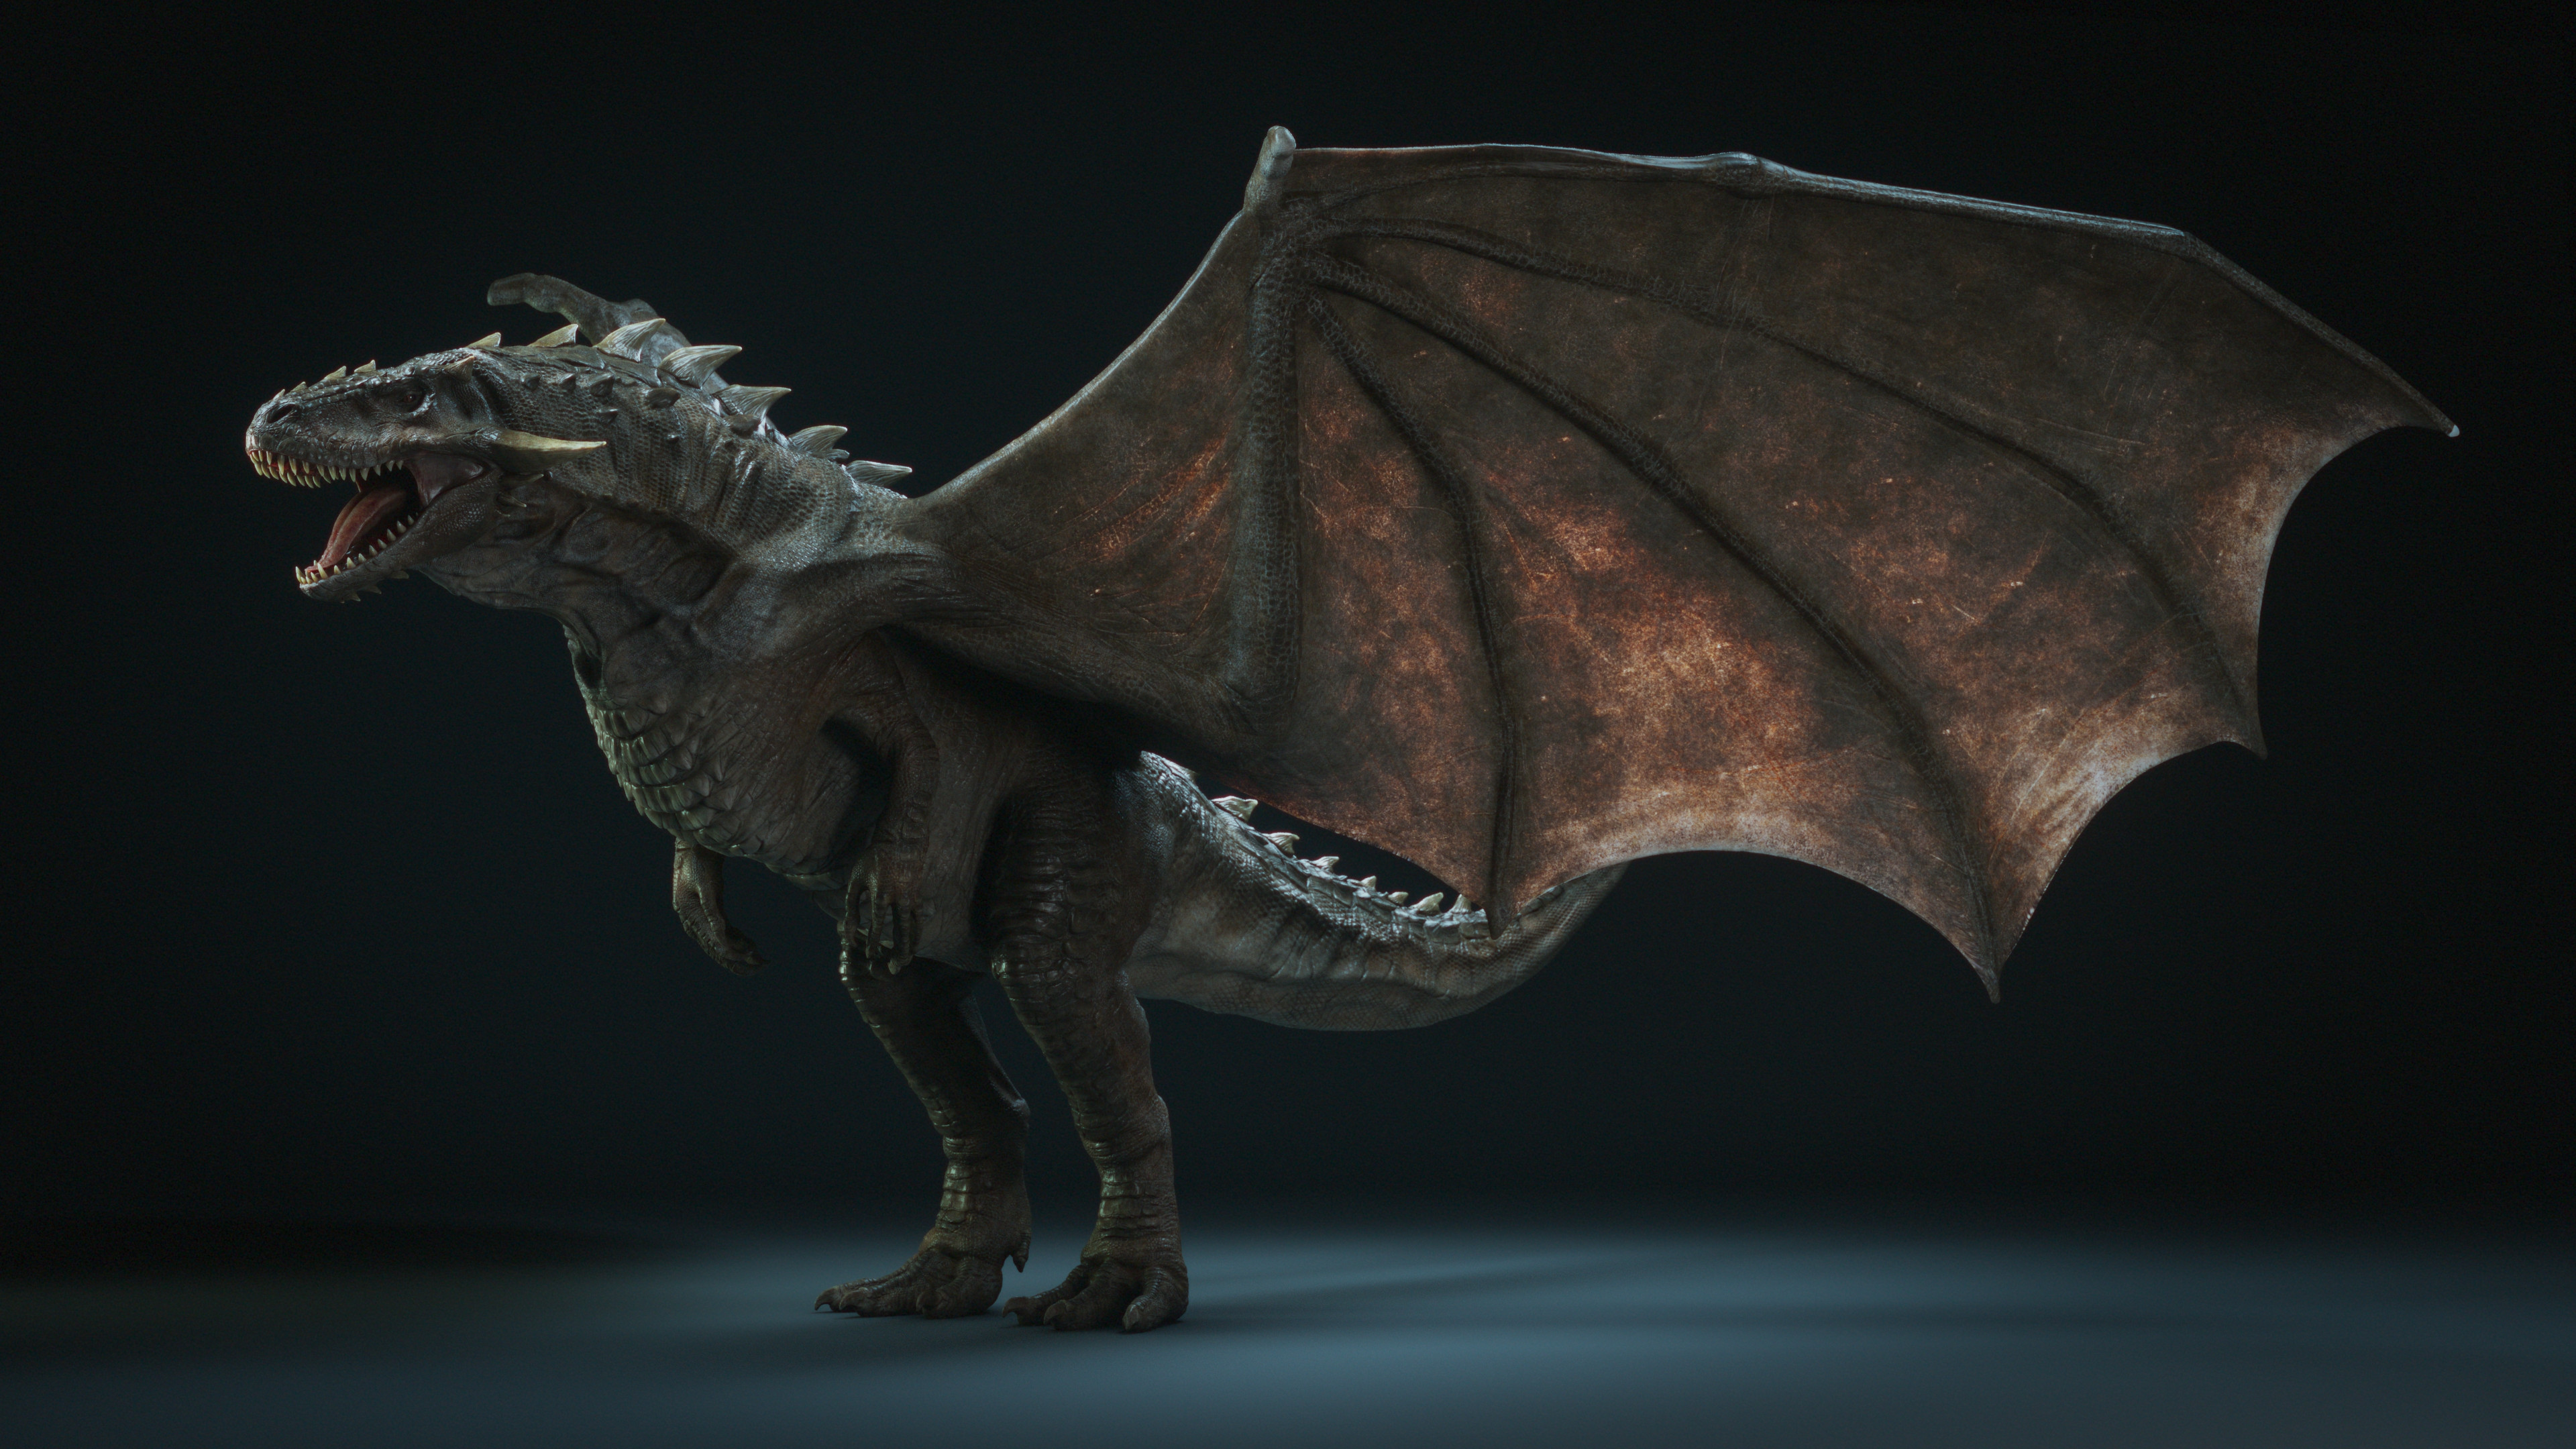 Early render created to test the texturing